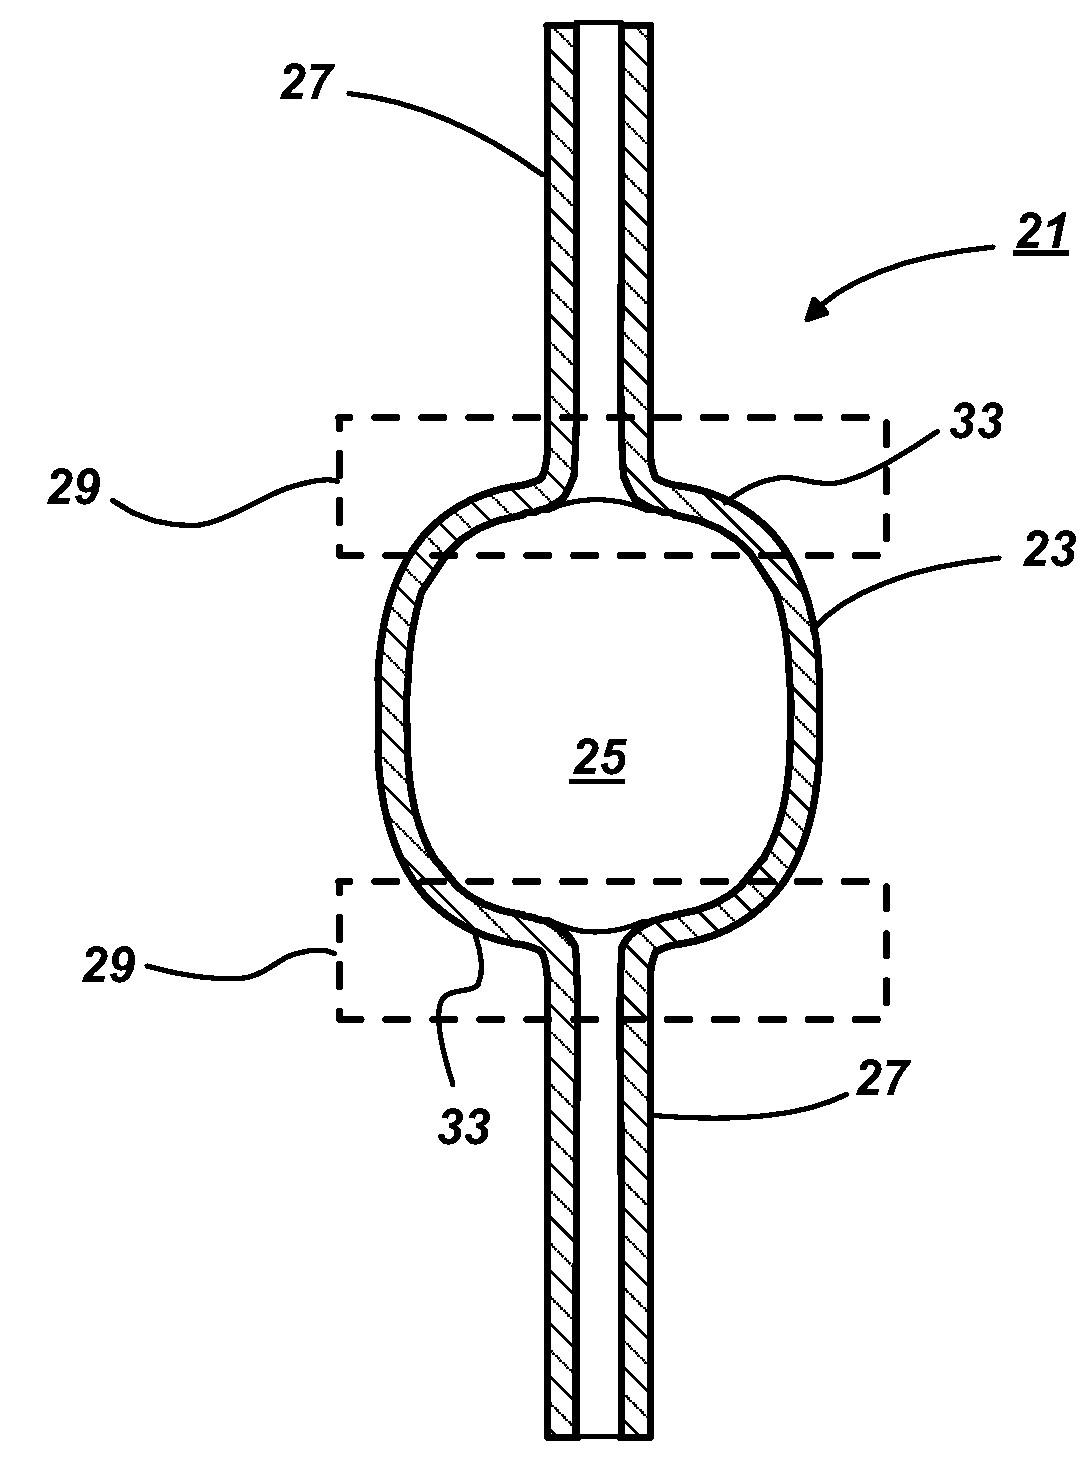 Ceramic Discharge Vessel Having an Opaque Zone and Method of Making Same